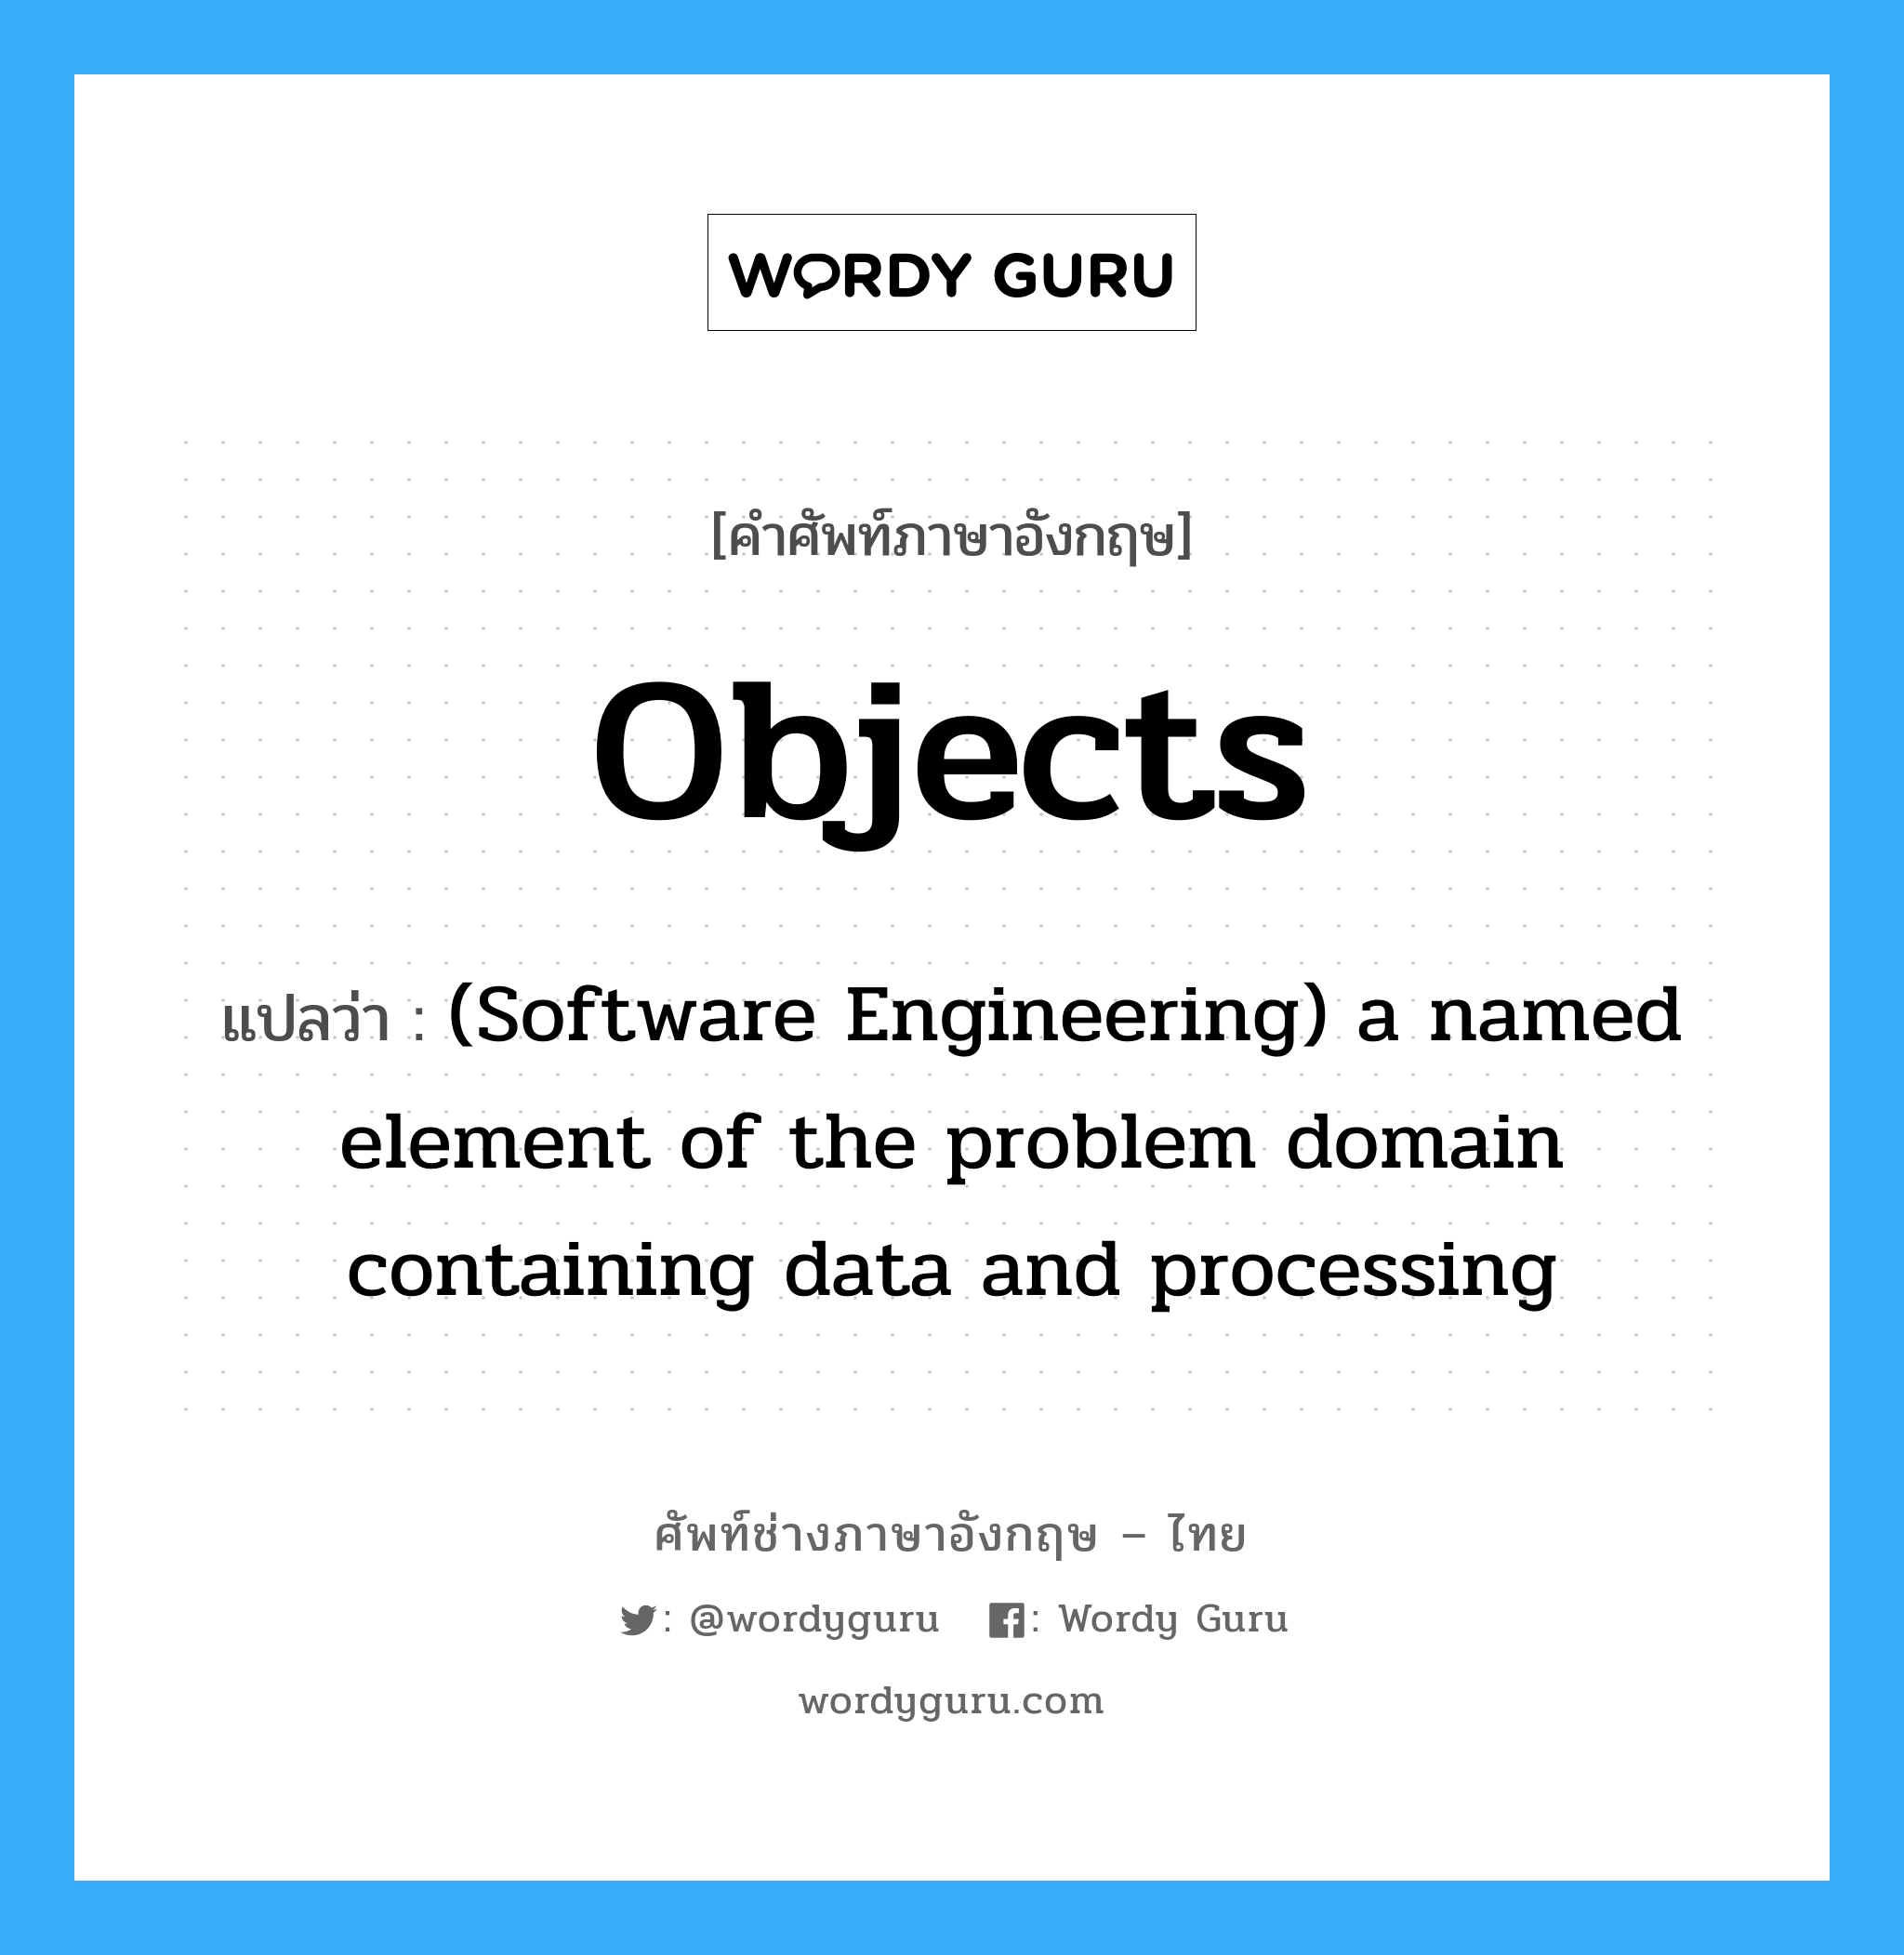 Objects แปลว่า?, คำศัพท์ช่างภาษาอังกฤษ - ไทย Objects คำศัพท์ภาษาอังกฤษ Objects แปลว่า (Software Engineering) a named element of the problem domain containing data and processing